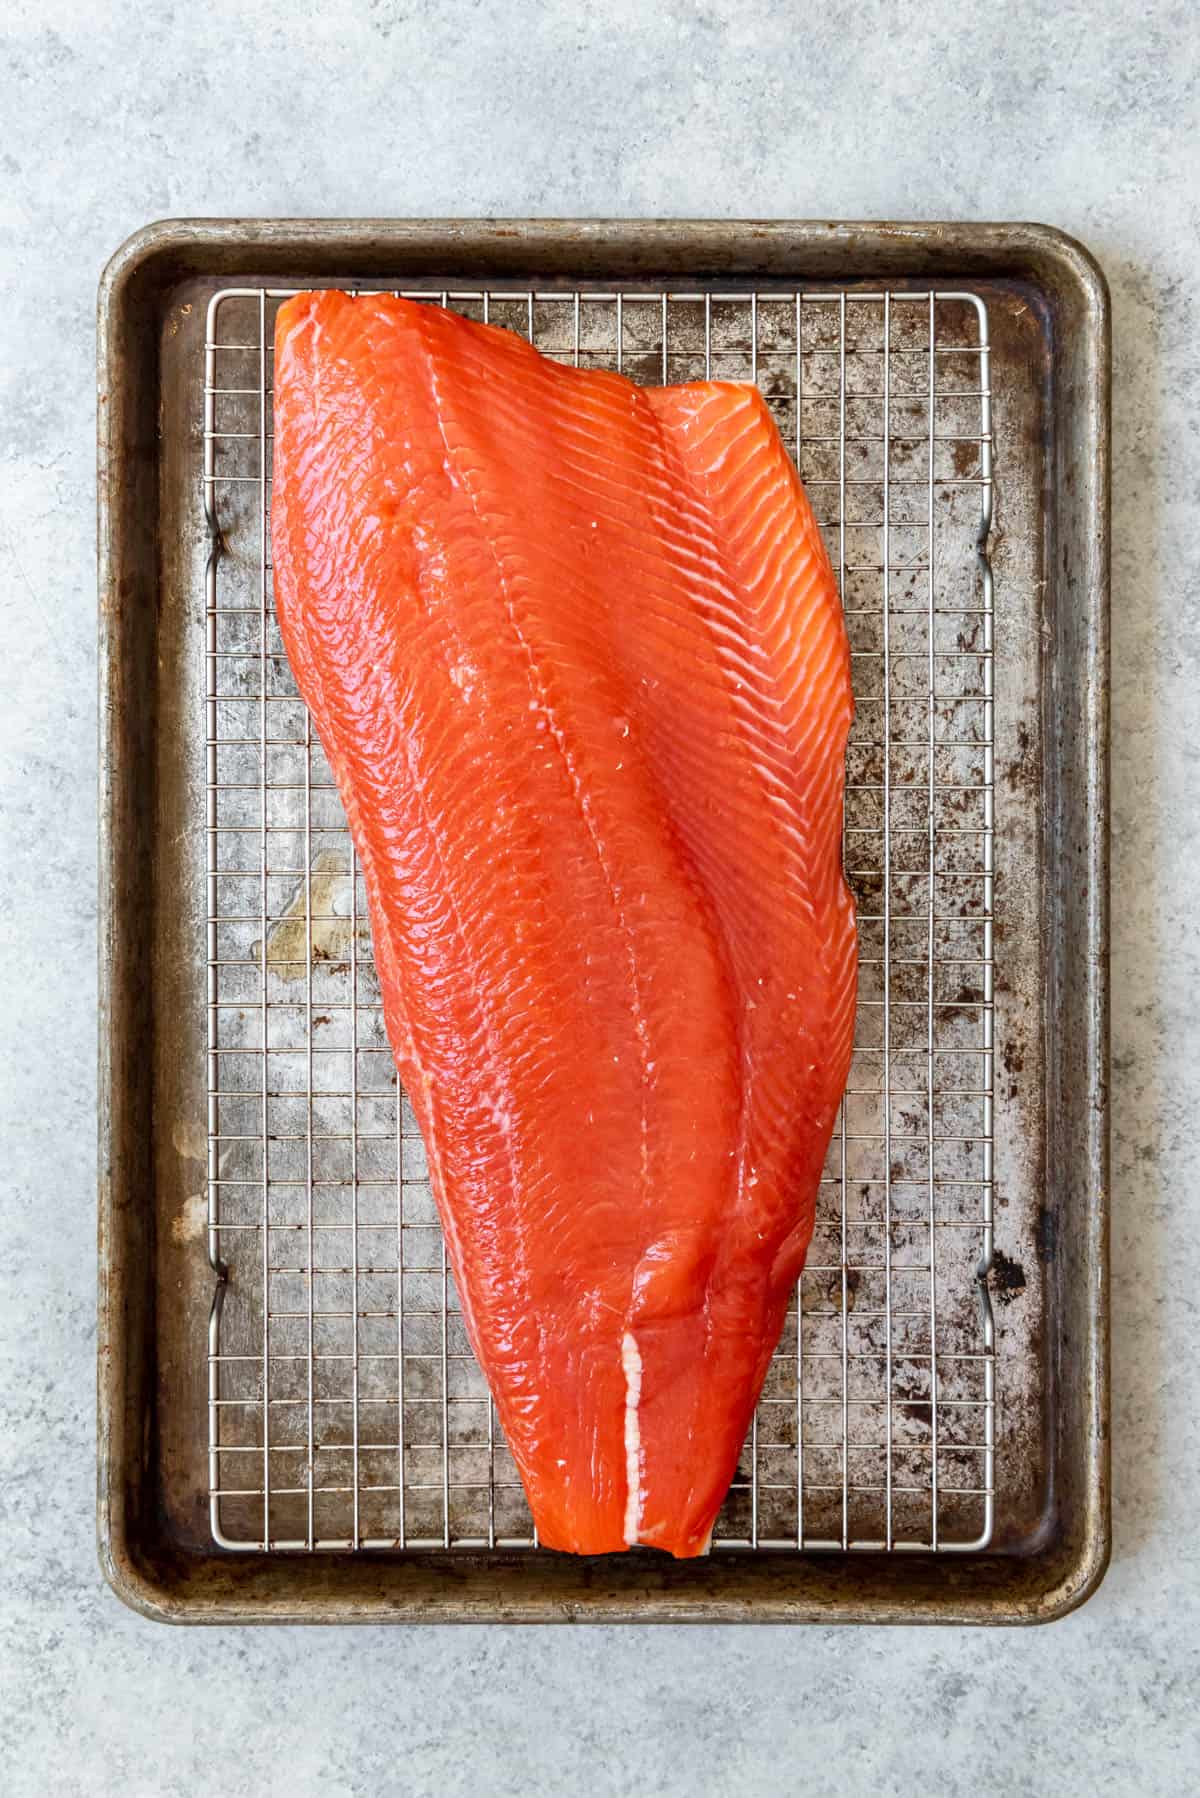 An image of brined salmon that is drying out to form a pellicle on top before being smoked.